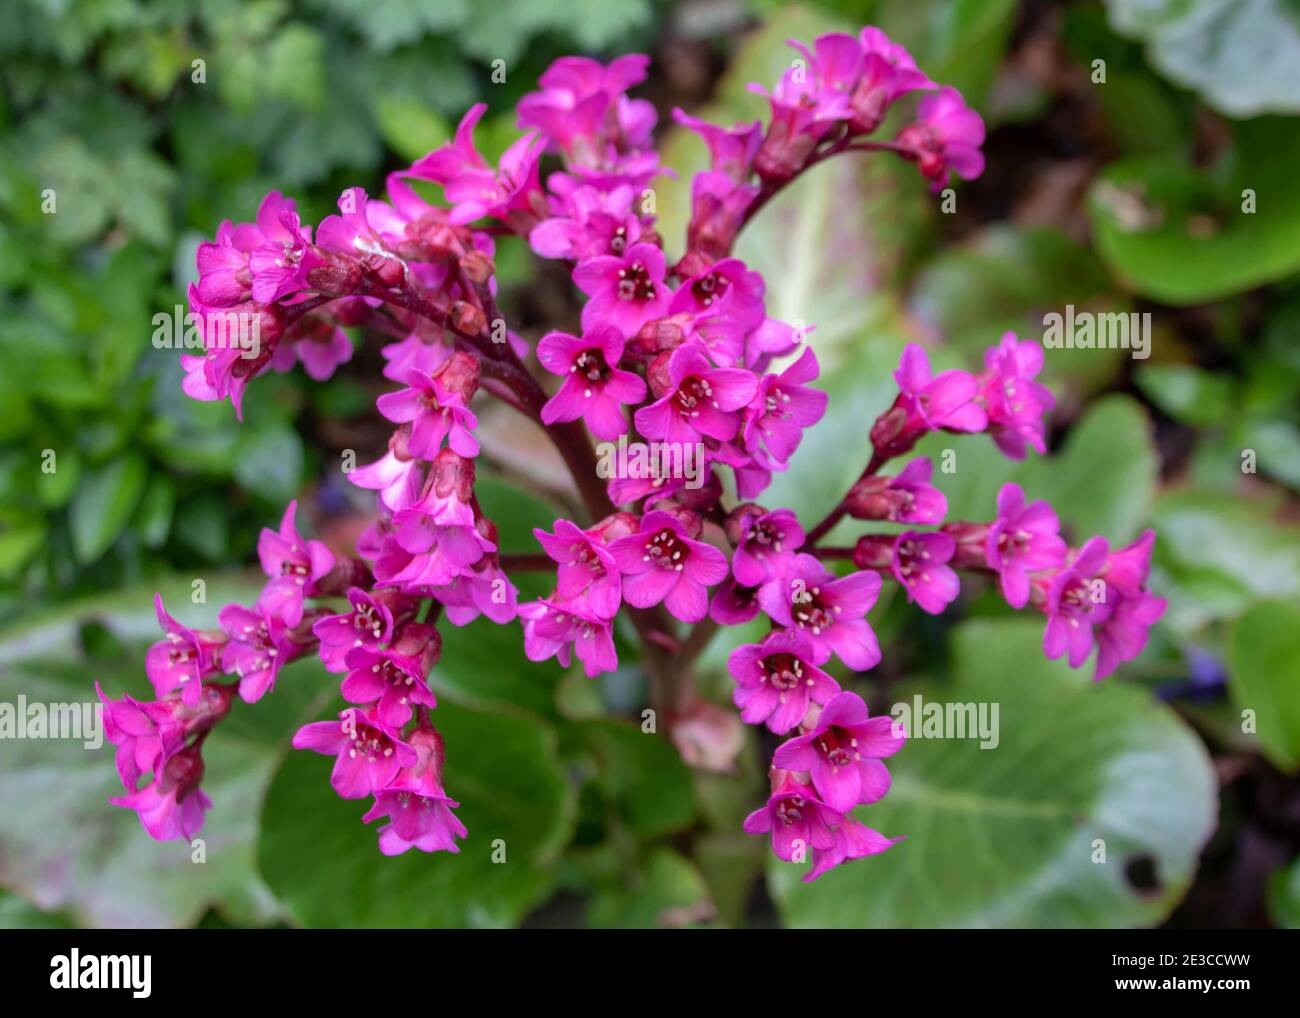 vibrant pink flowers of Bergenia Cordifolia also known as heart leaf bergenia Stock Photo